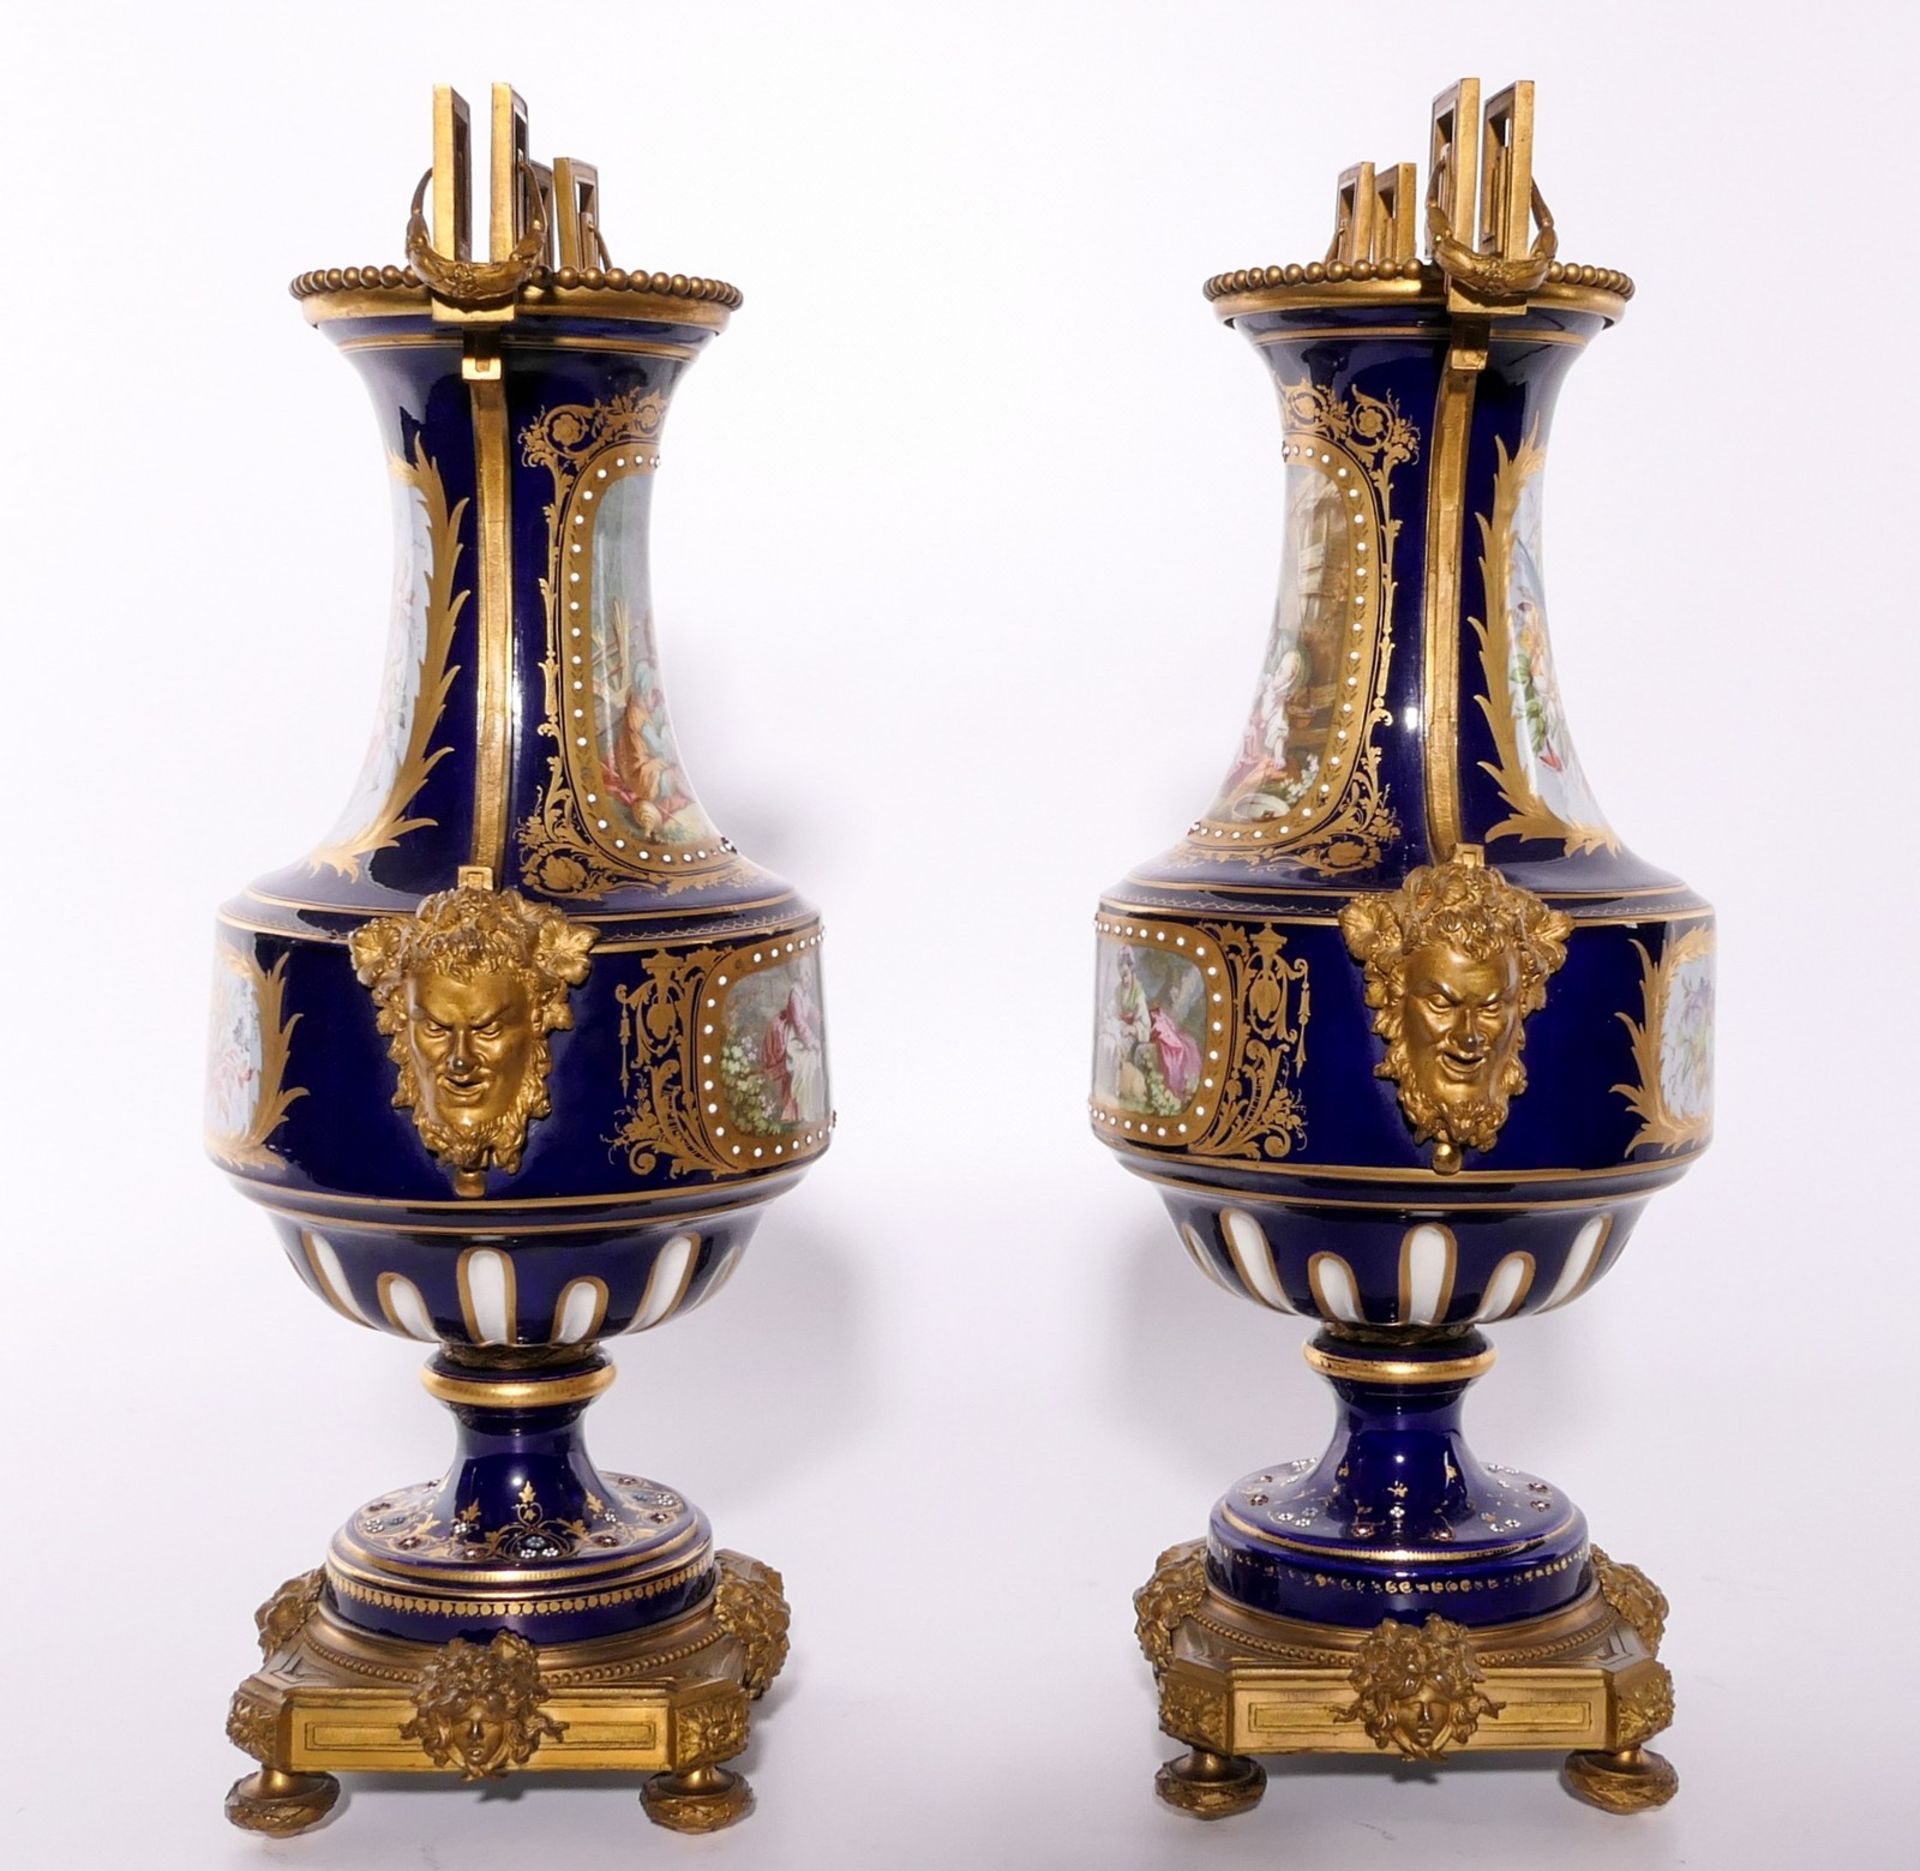 A pair of Neoclassical vases in Sèvres-porcelain, blue royale ground, the front with gilt cartouches - Image 4 of 11